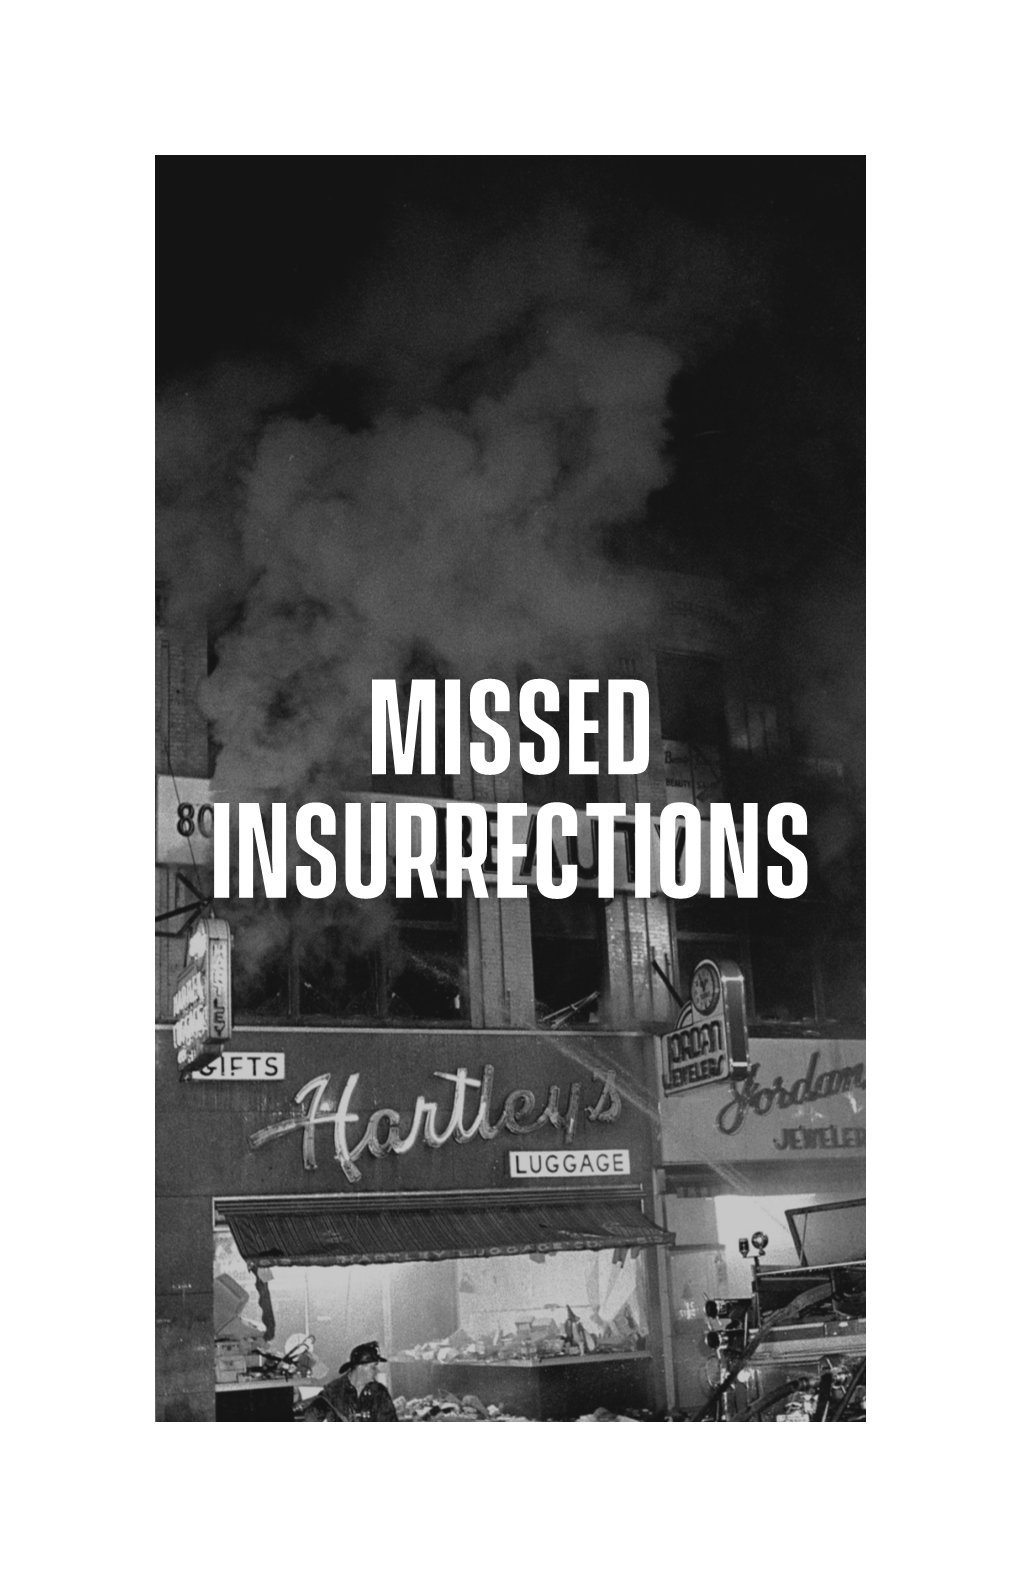 Missed Insurrections